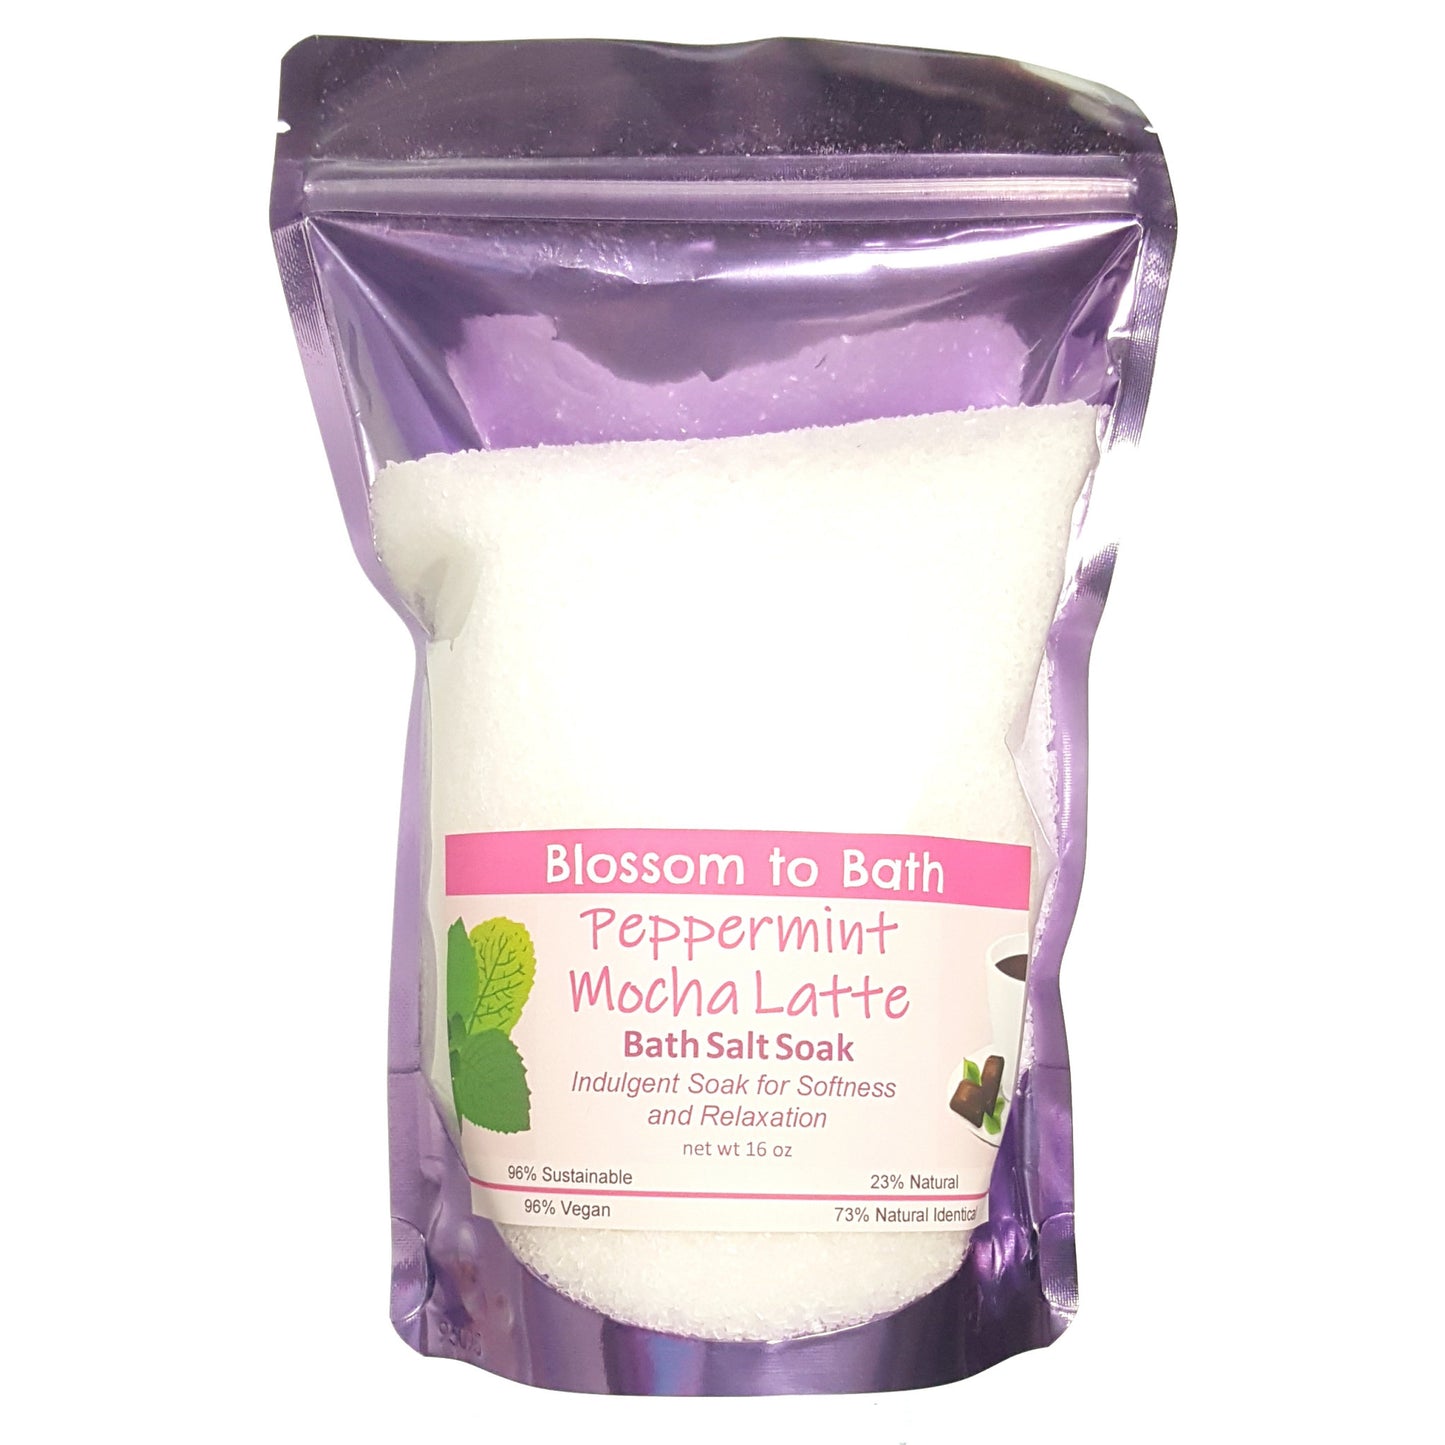 Buy Blossom to Bath Peppermint Mocha Latte Bath Salt Soak from Flowersong Soap Studio.  Scented epsom salts for a luxurious soaking experience  A confectionary blend of fresh mint, rich fudge, and coffee.